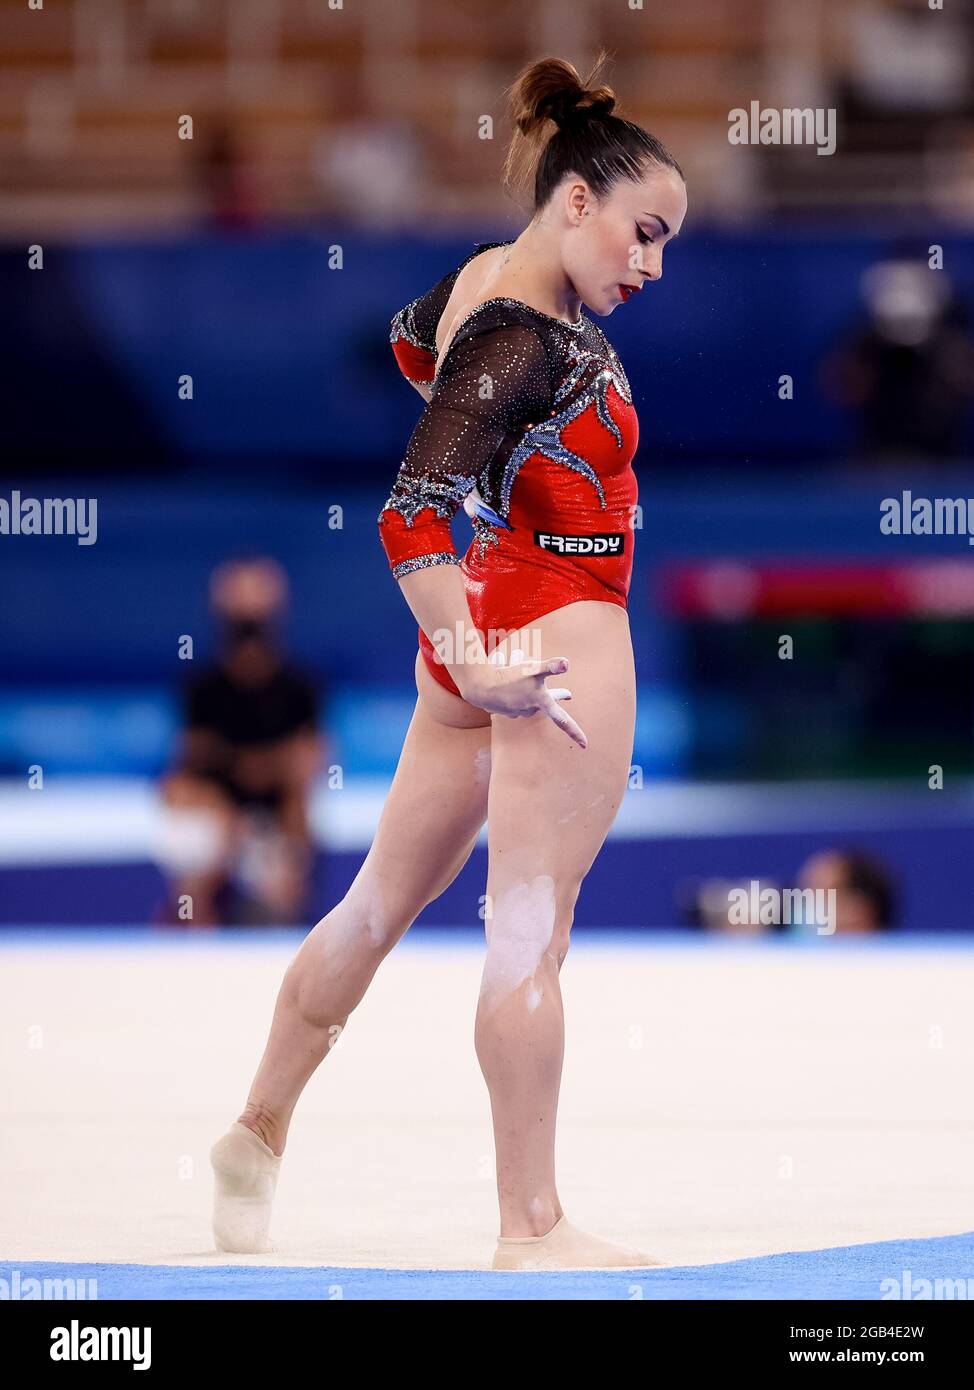 TOKYO, JAPAN - AUGUST 2: Vanessa Ferrari of Italy competing on Women's Floor Exercise Final during the Tokyo 2020 Olympic Games at the Ariake Gymnastics Centre on August 2, 2021 in Tokyo, Japan (Photo by Iris van den Broek/Orange Pictures) Stock Photo